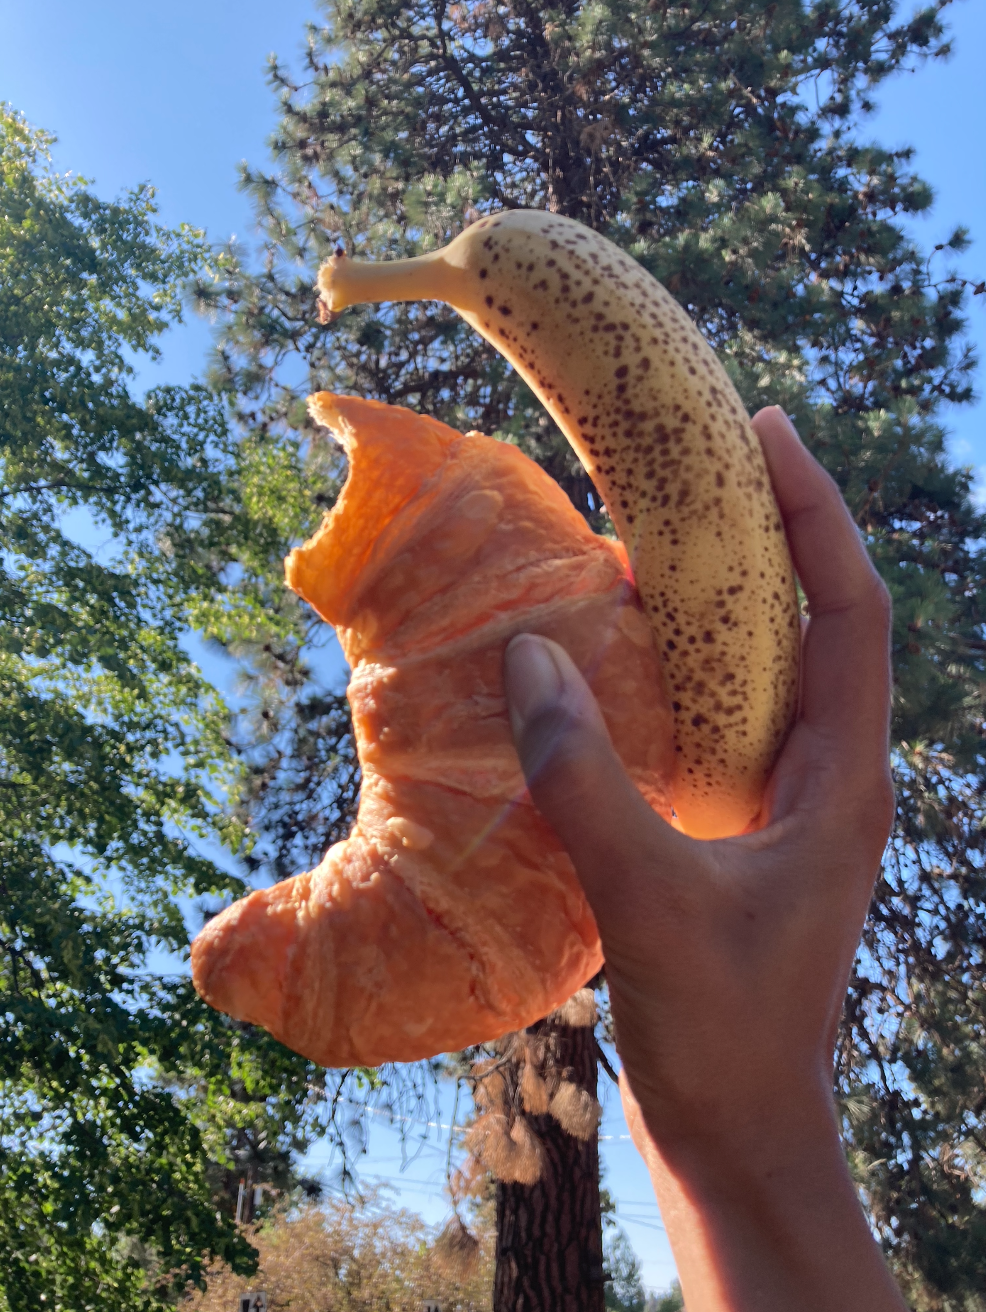 Whether you're eating bananas, bagels or beans the perfect picnic is only a snack away. Photo: Land Trust.